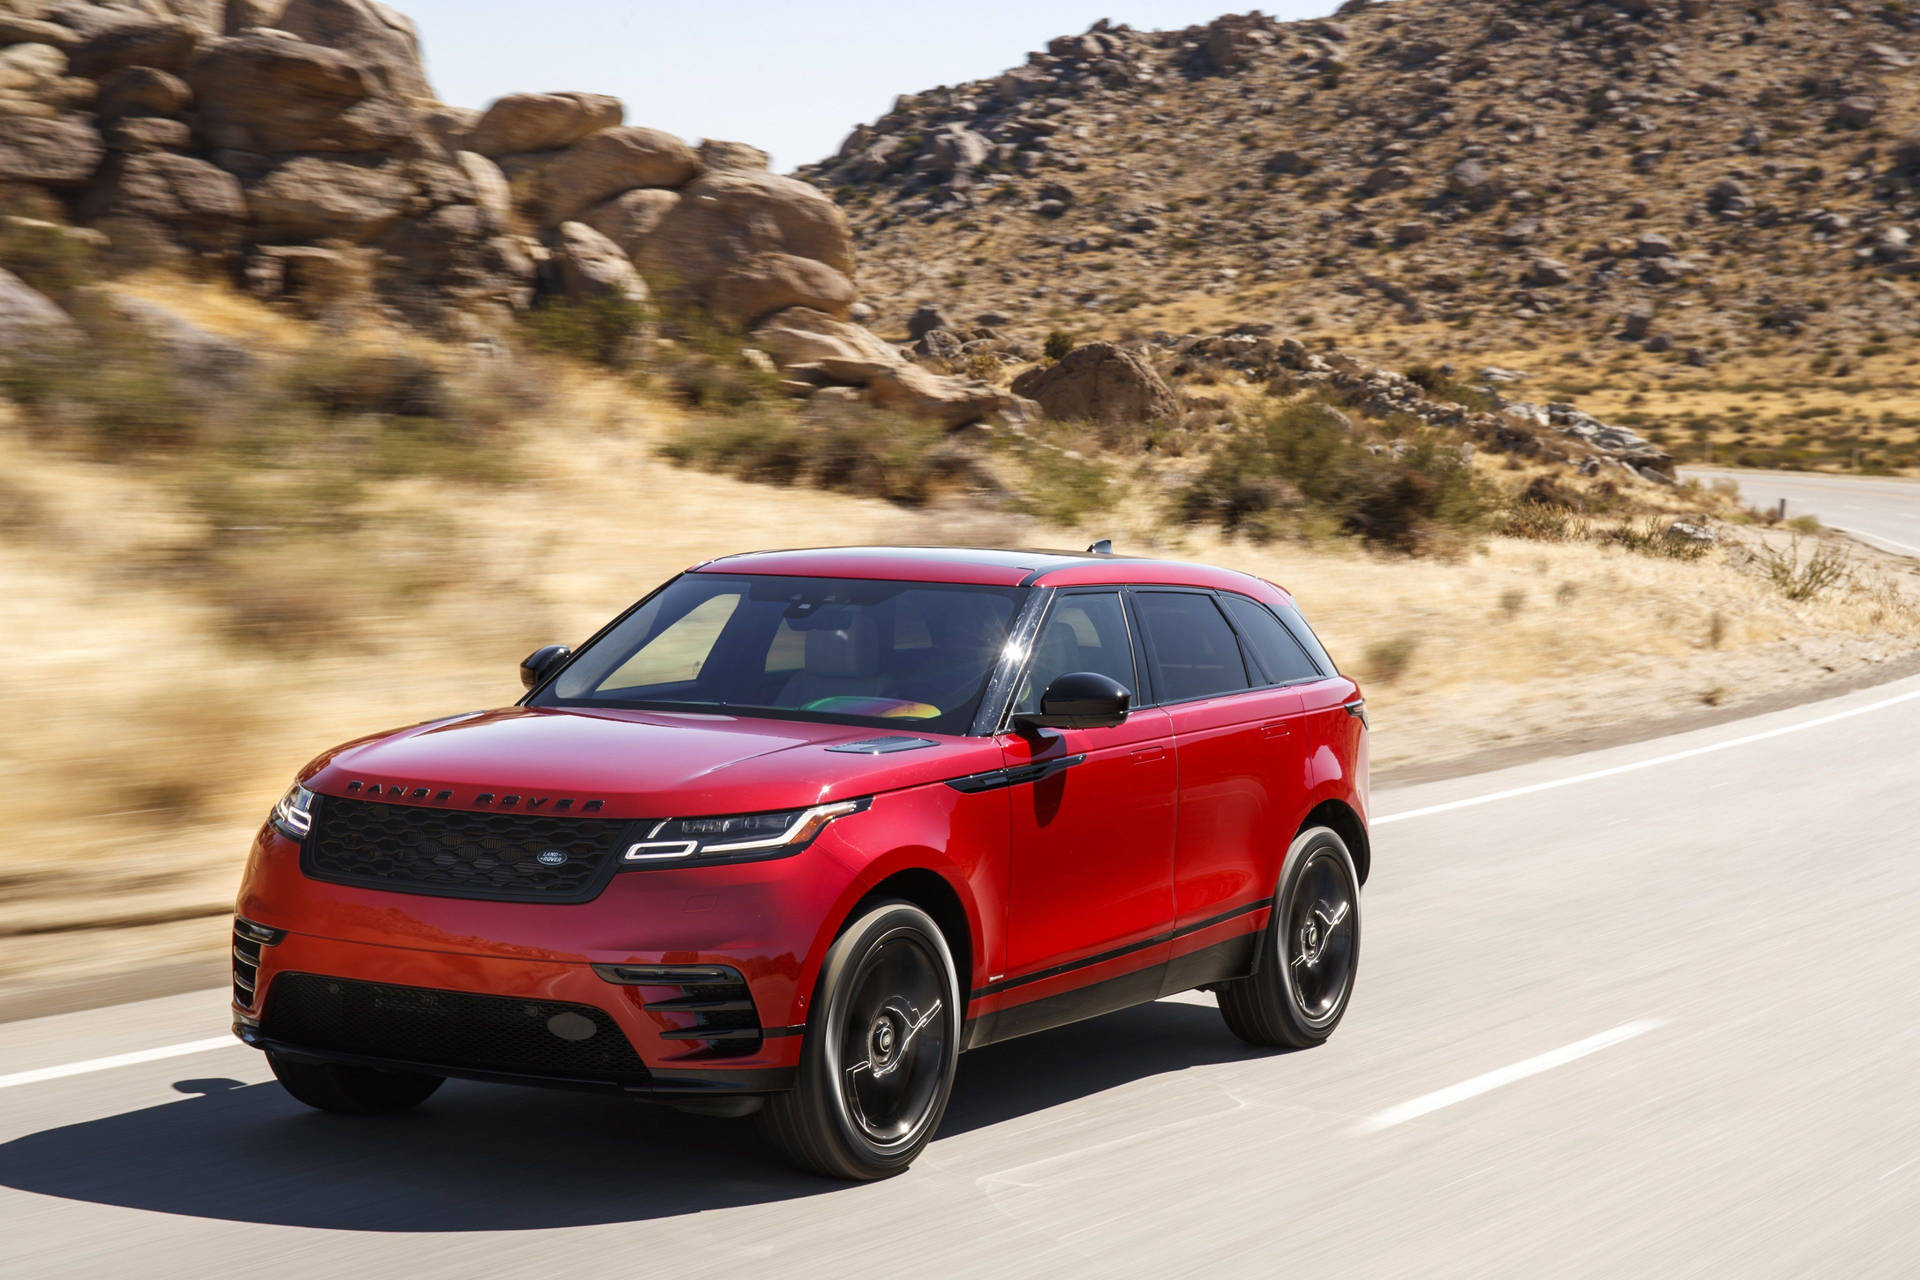 Take On Any Adventure With the Red Land Rover SUV Wallpaper